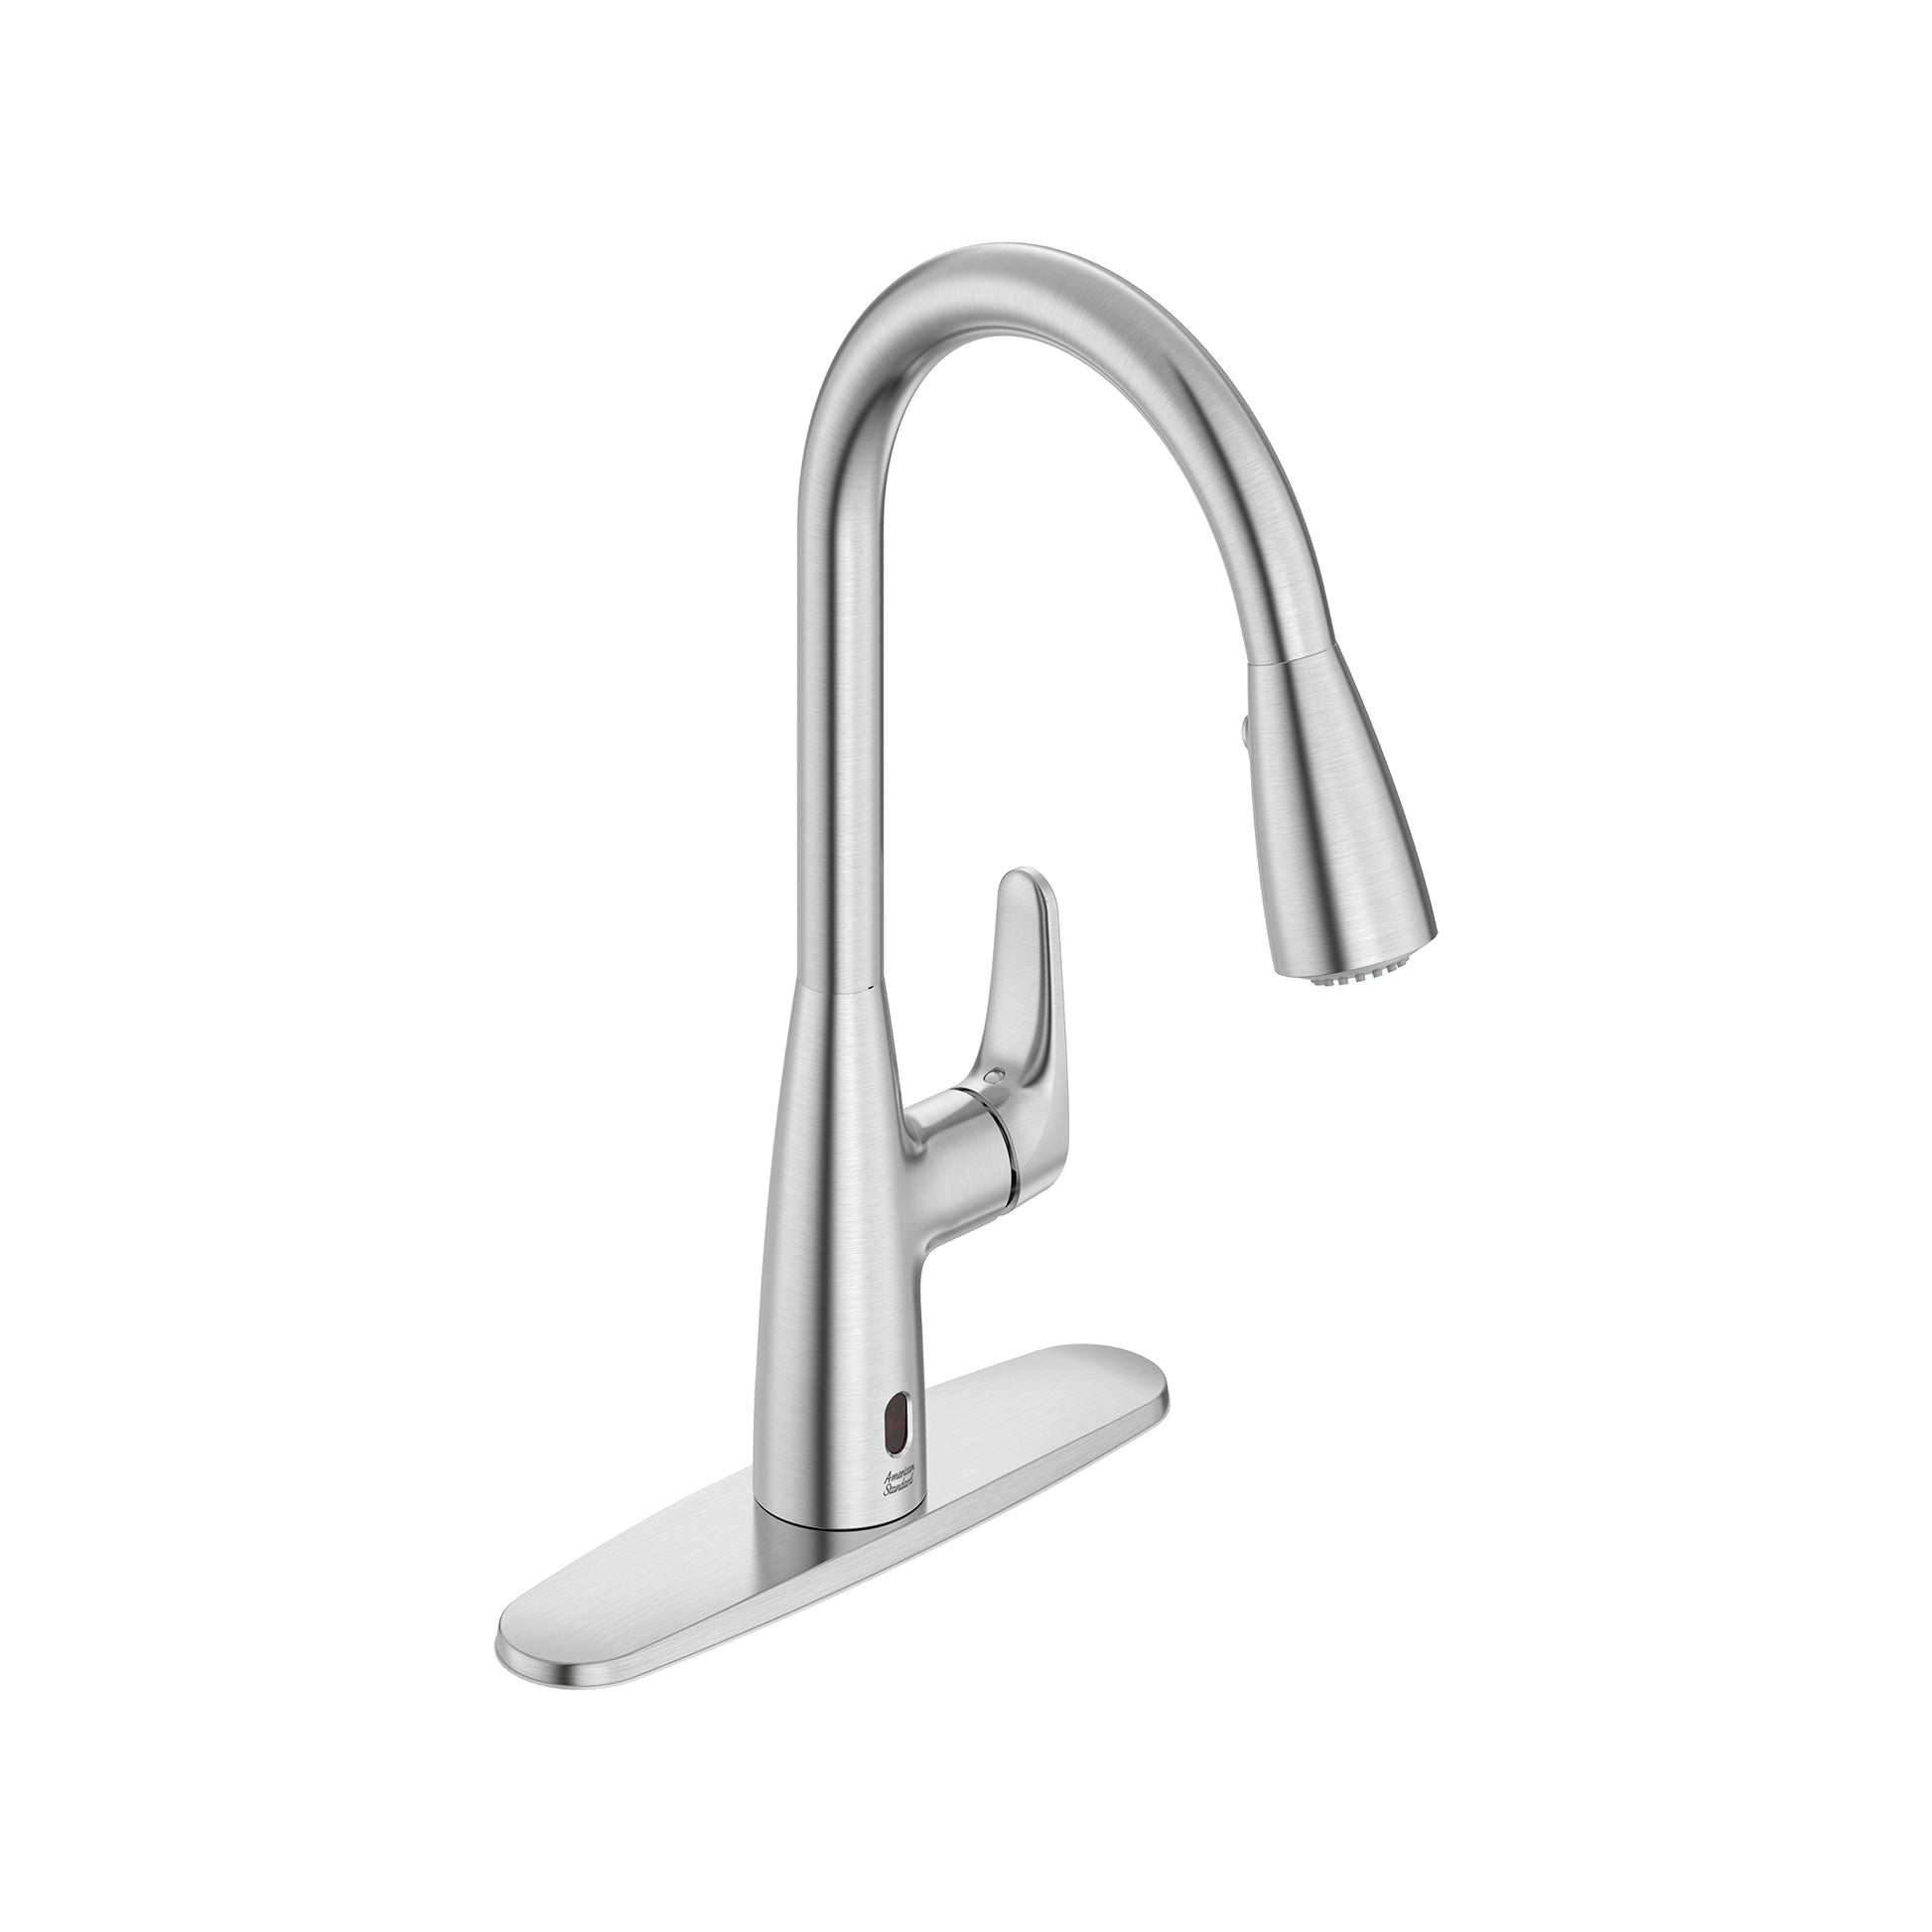 AMERICAN-STANDARD 7077380.075, Colony PRO Touchless Single-Handle Pull-Down Dual Spray Kitchen Faucet 1.5 gpm/5.7 L/min in Stainless Stl